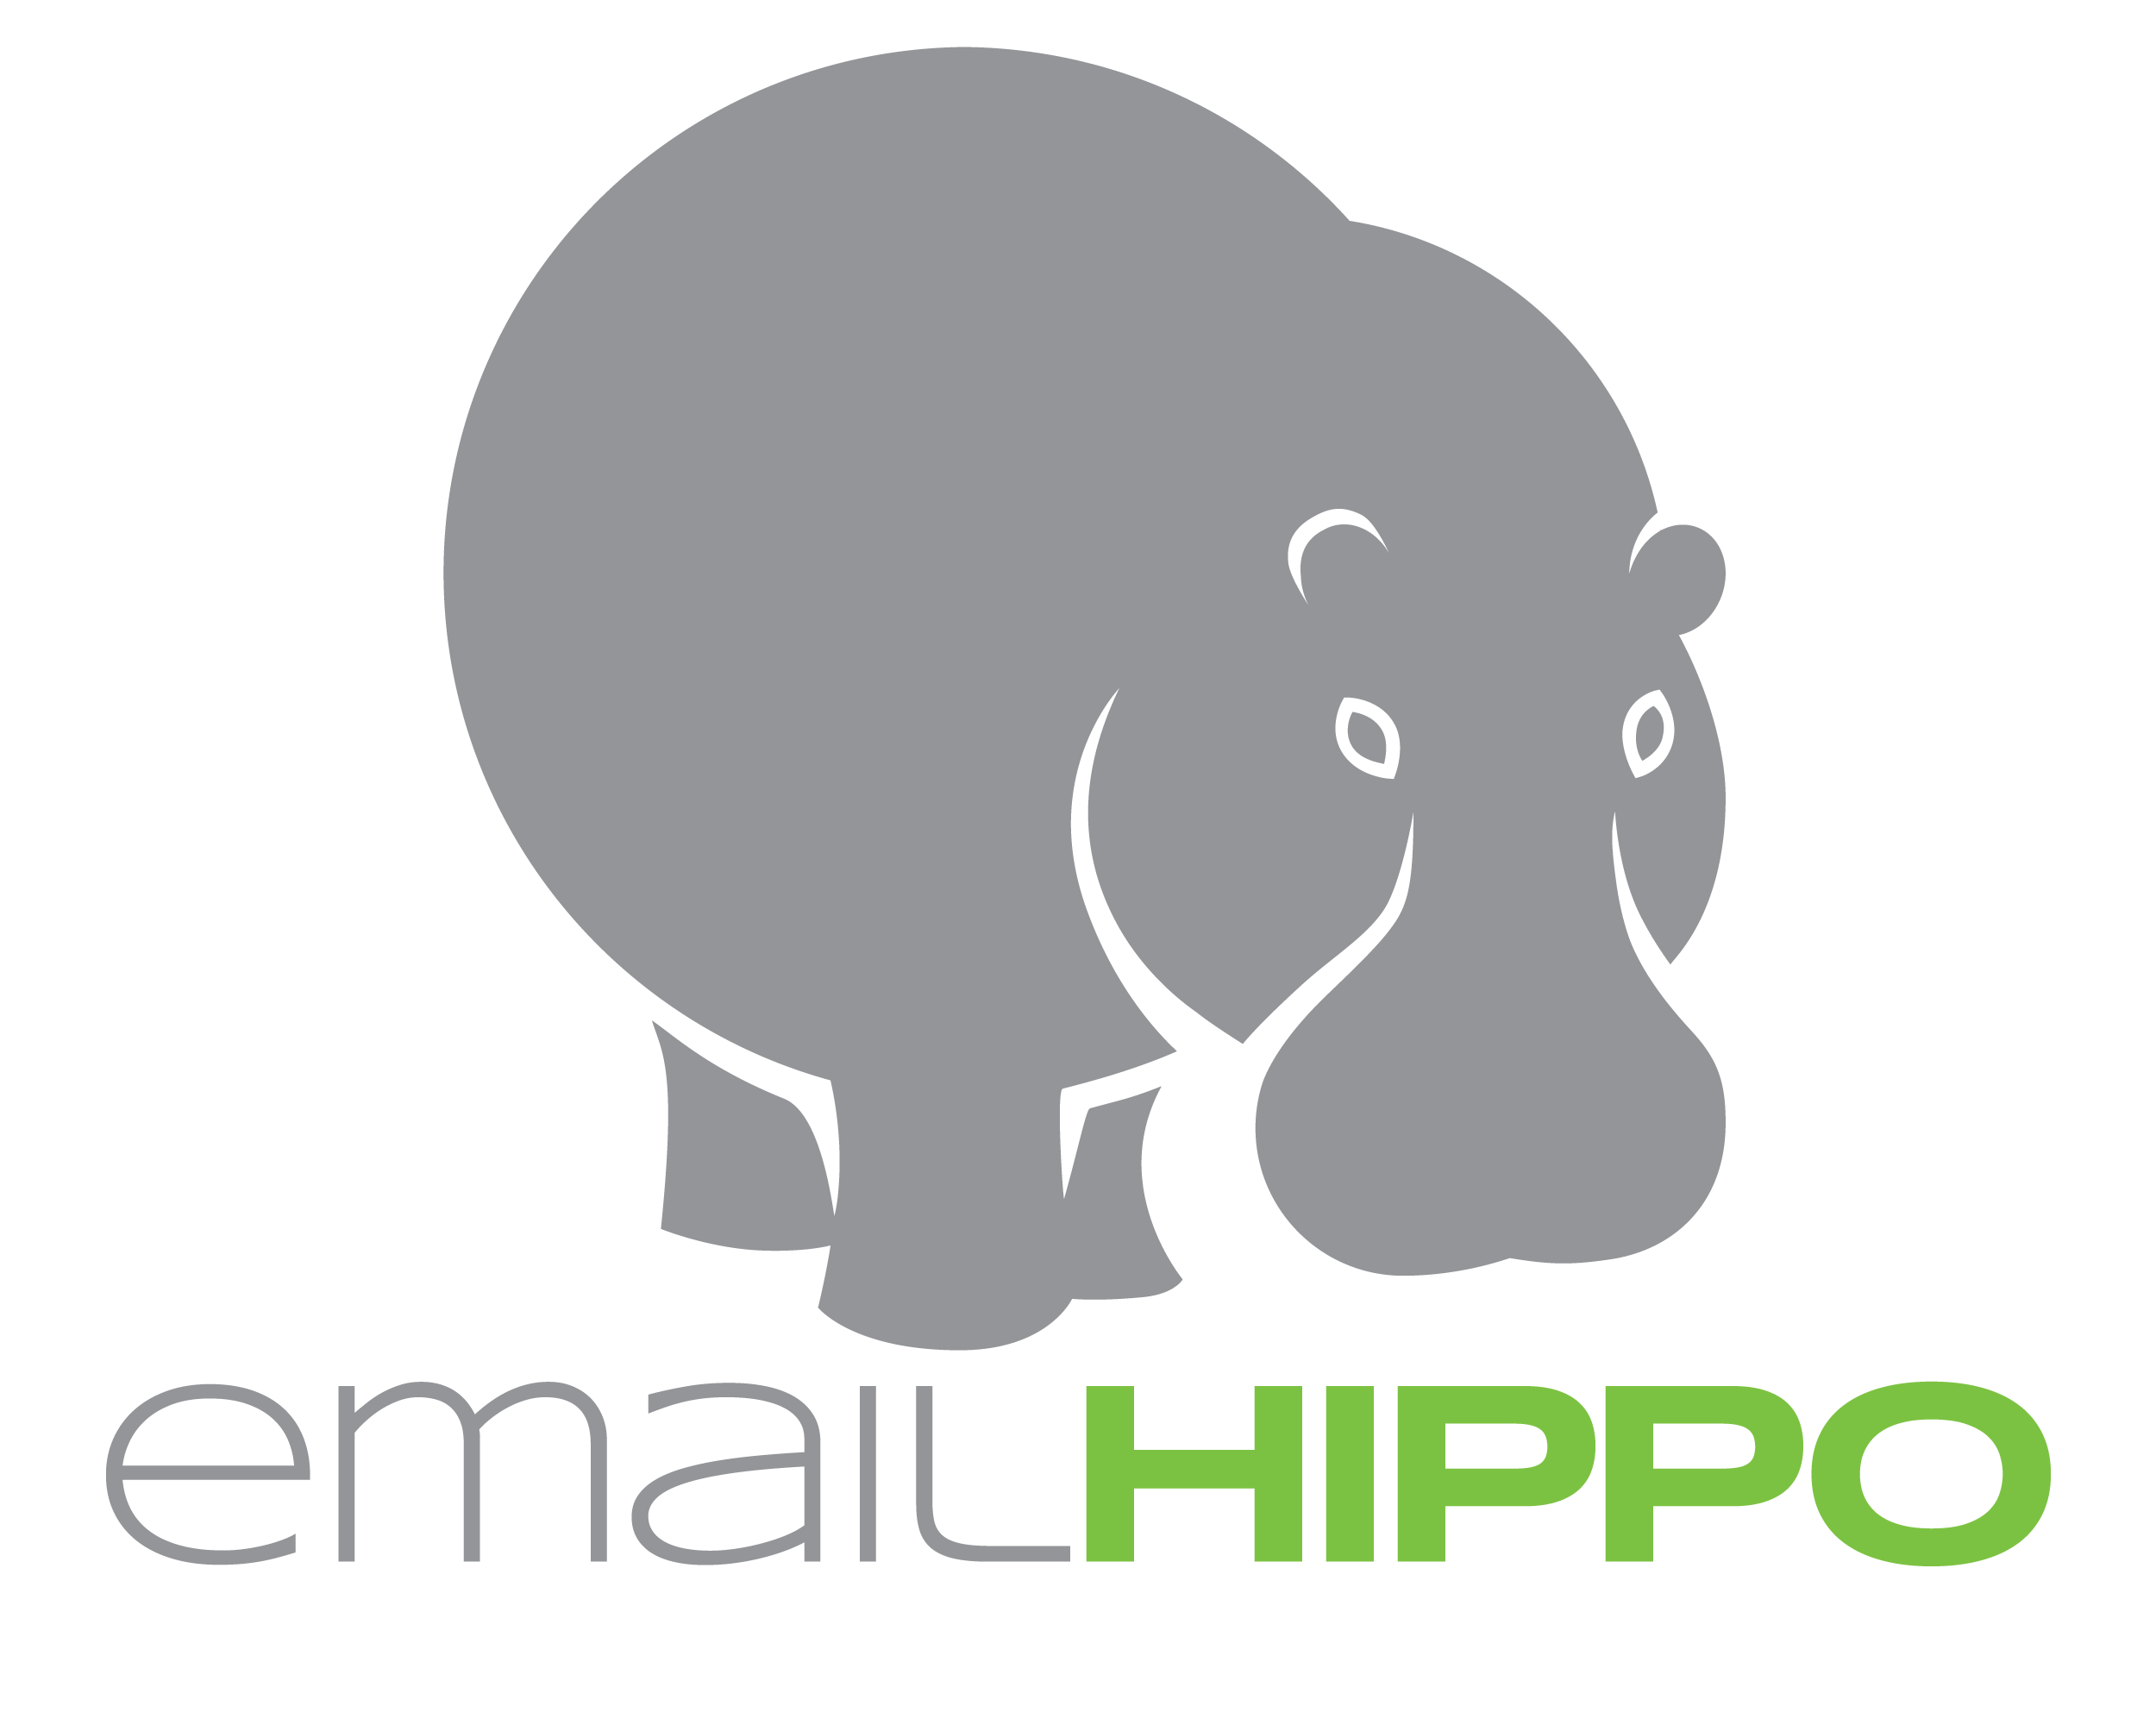 Email Hippo provides email verification and services